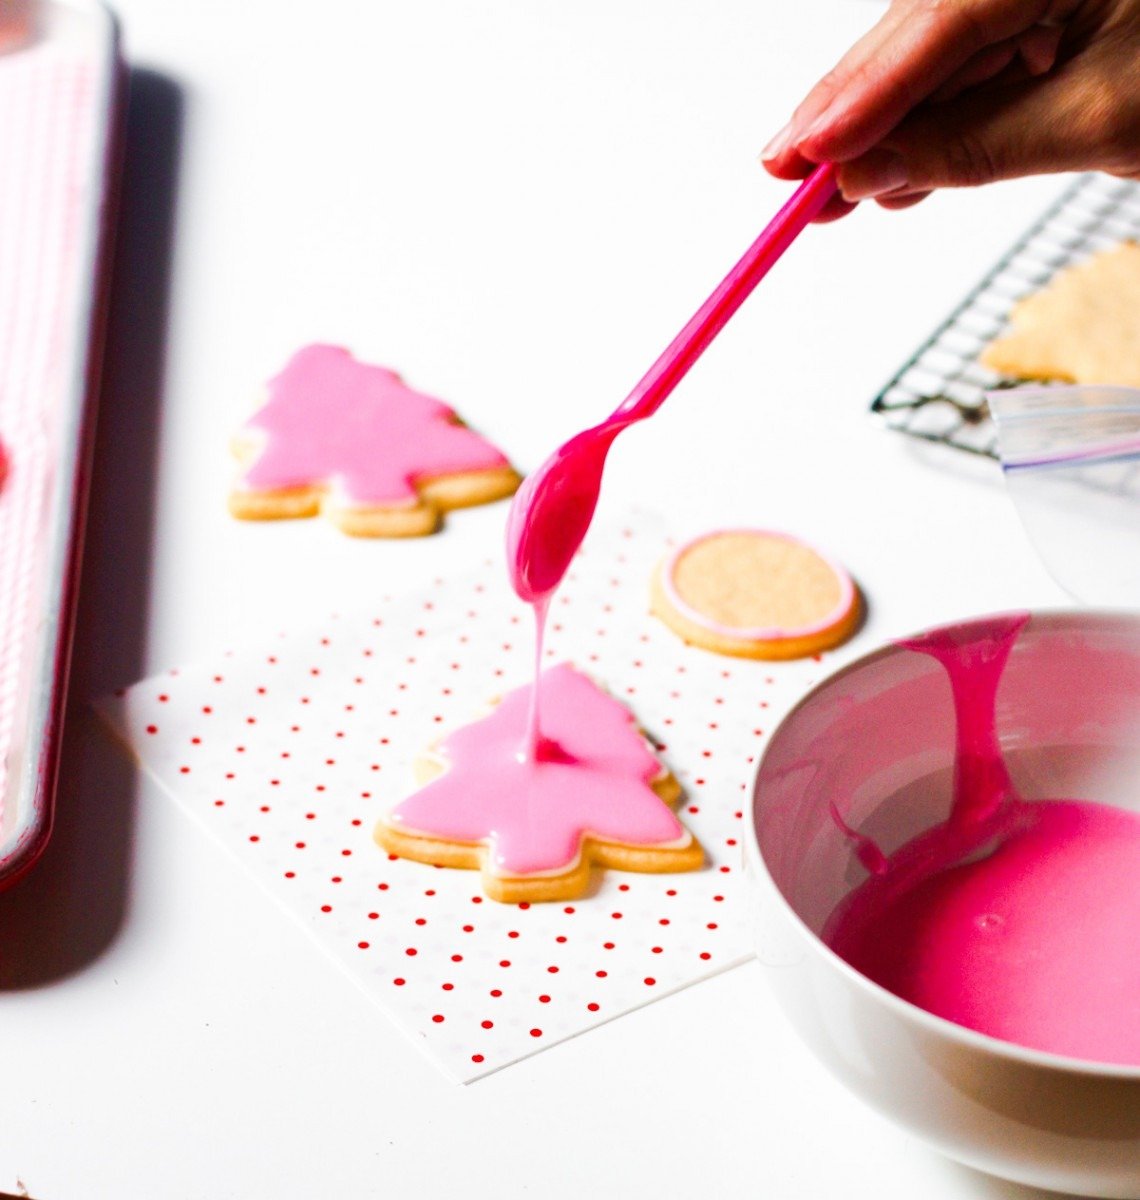 Pretty Party Basics  Tips & Tricks To Decorate A Sugar Cookie Like